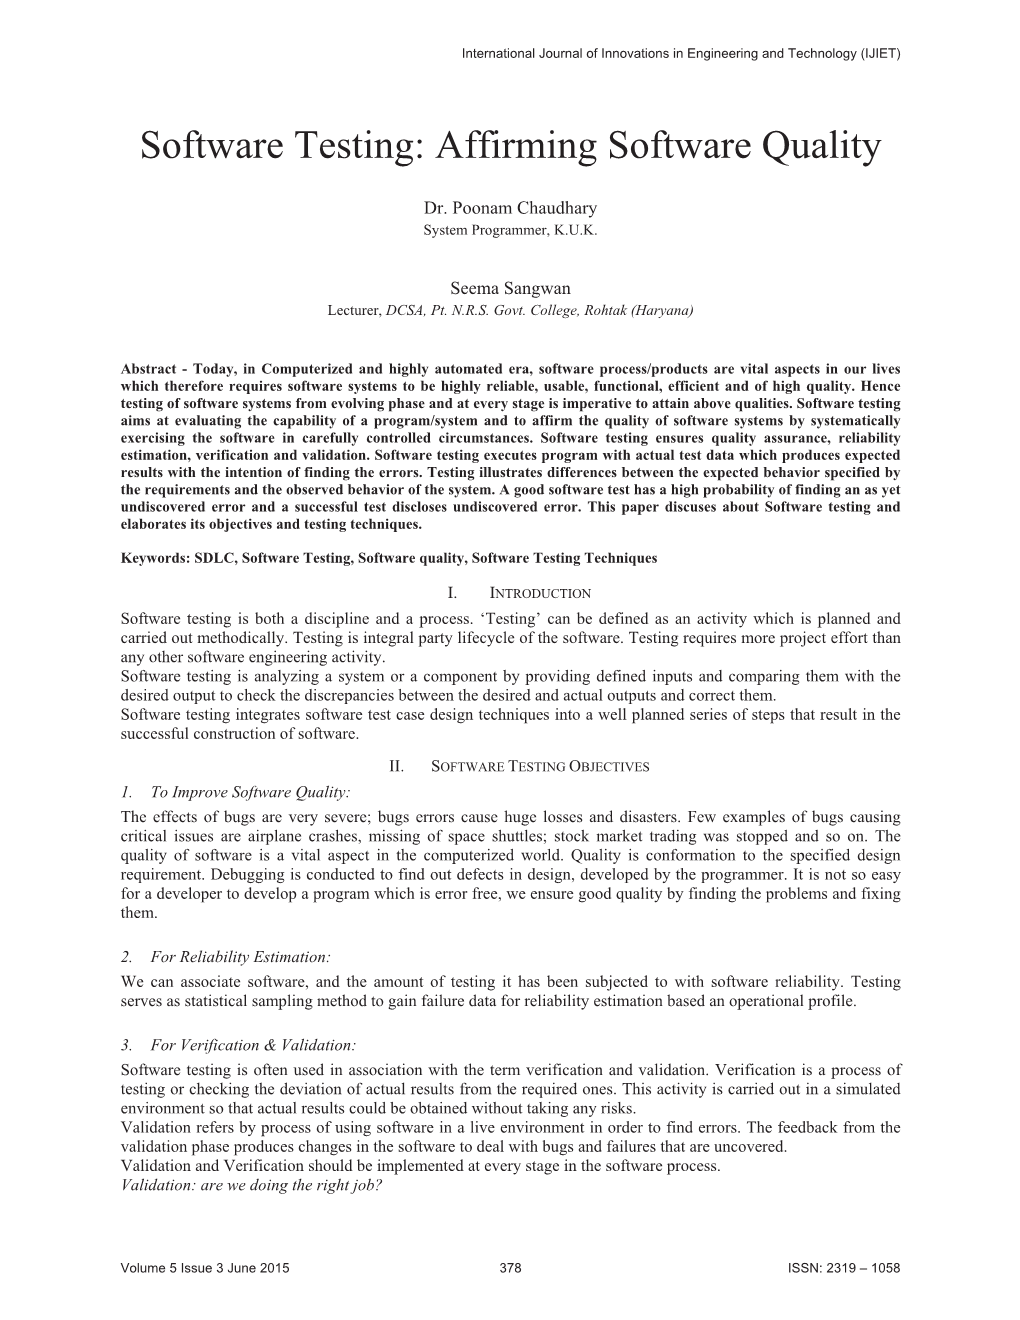 Software Testing: Affirming Software Quality